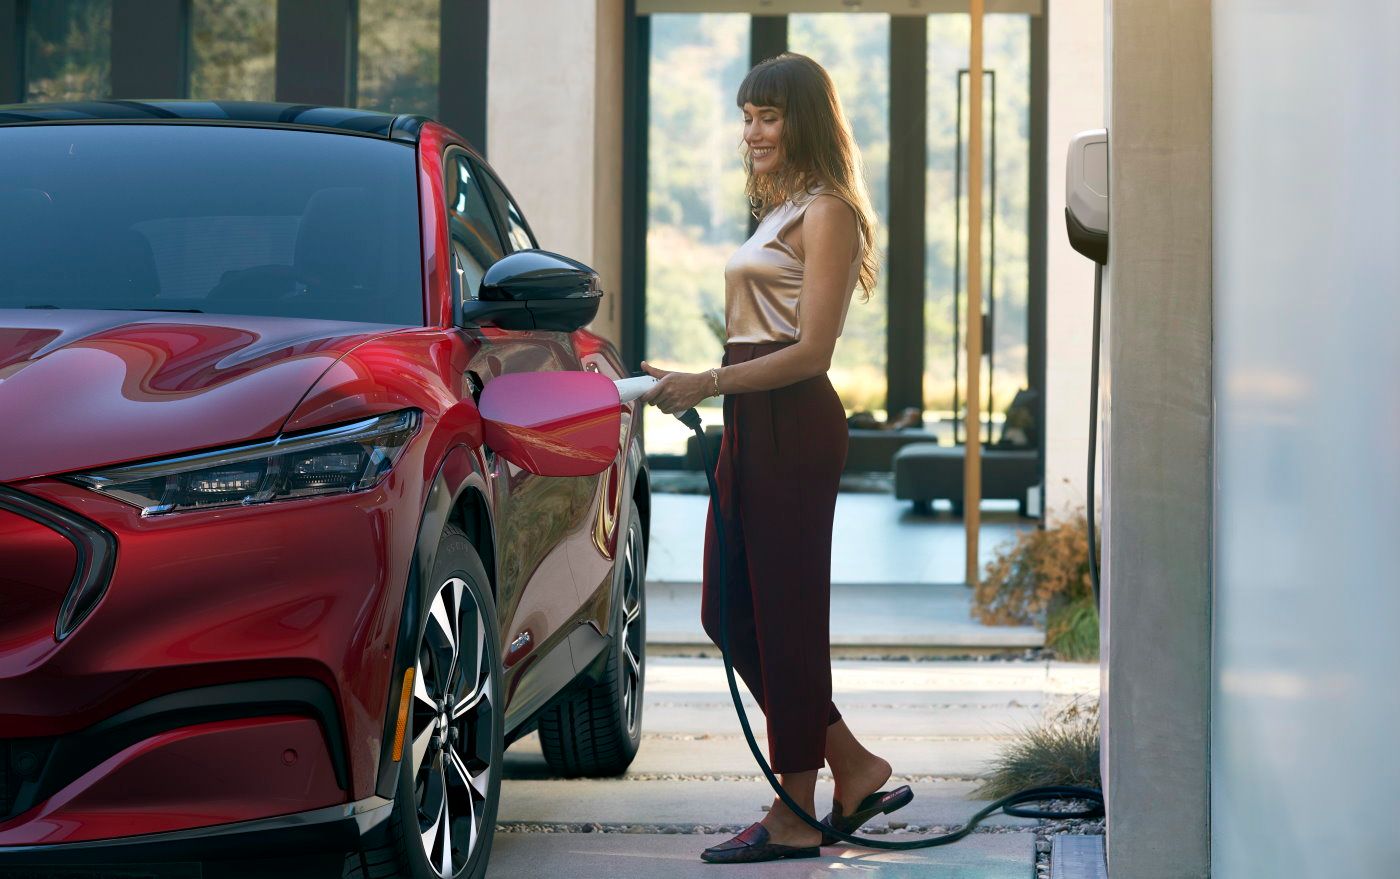 Electric vehicle owners do 80 percent of their charging at home, and Ford is offering a Ford Connected Charge Station that will be able to add an estimated average range of 32 miles per charging hour with a 240V outlet to the Mustang Mach-E RWD with extended range battery.